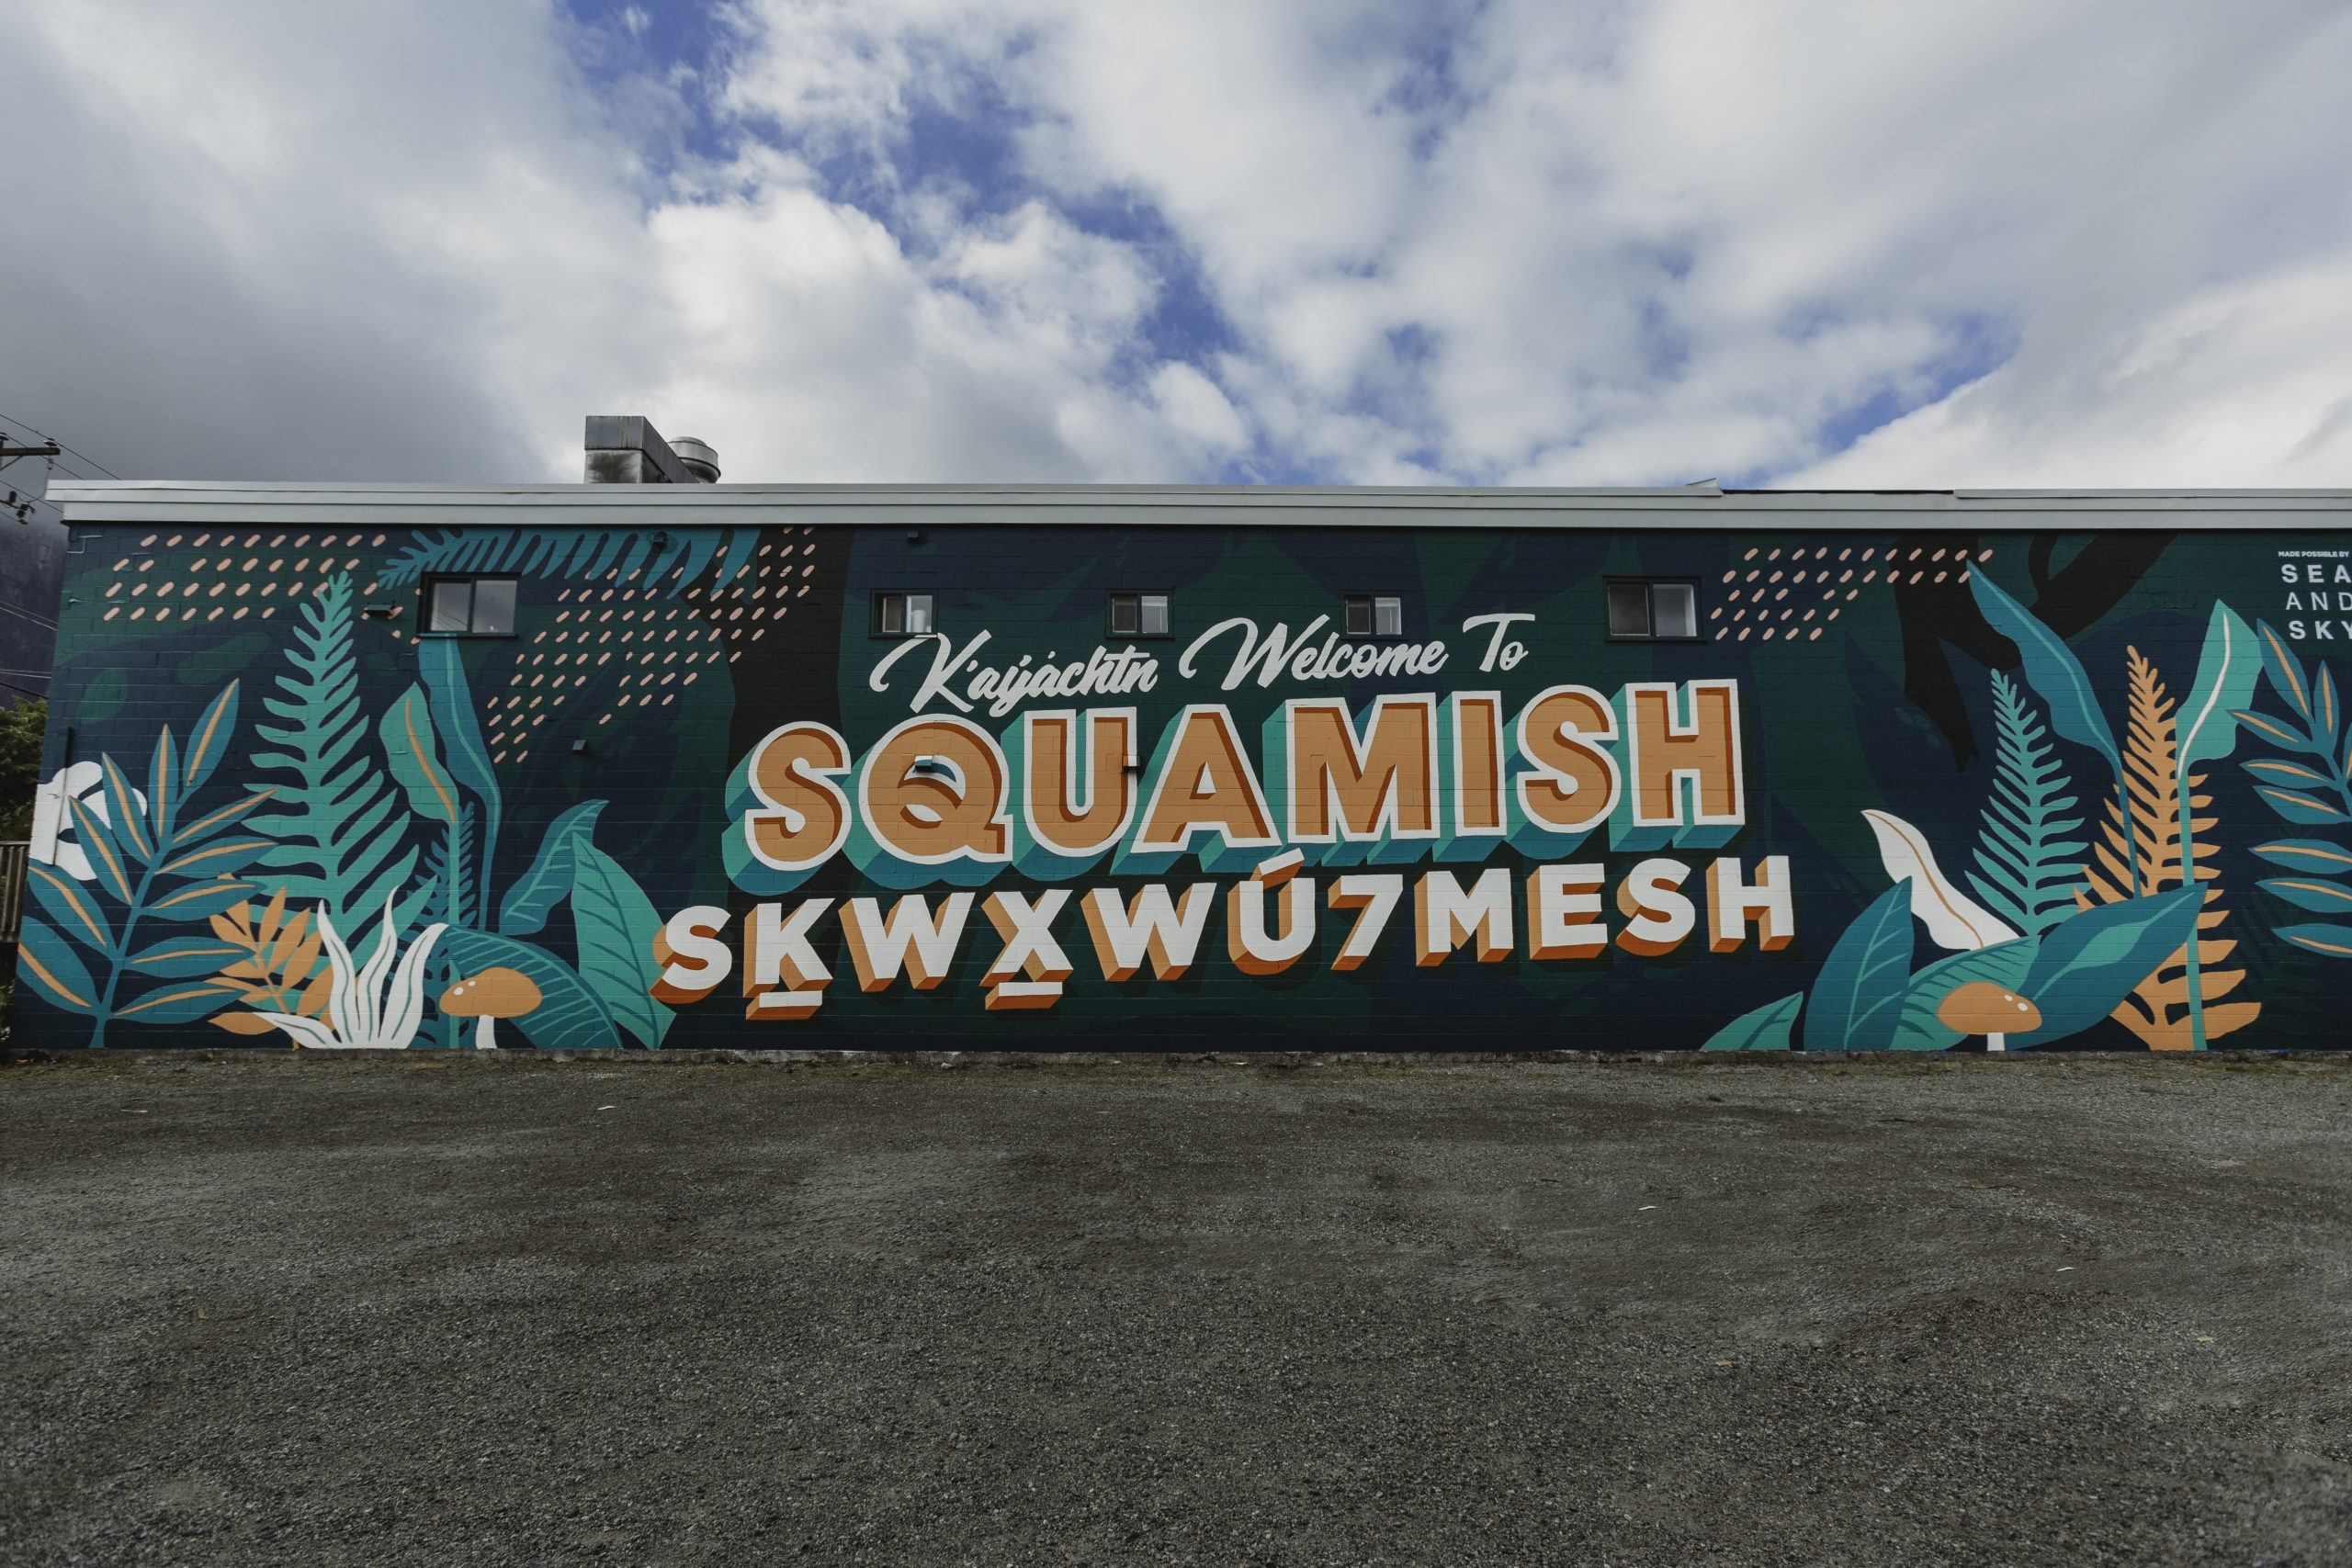 https://www.downtownsquamish.com/wp-content/uploads/2020/09/BIA-Mural-2-scaled.jpg